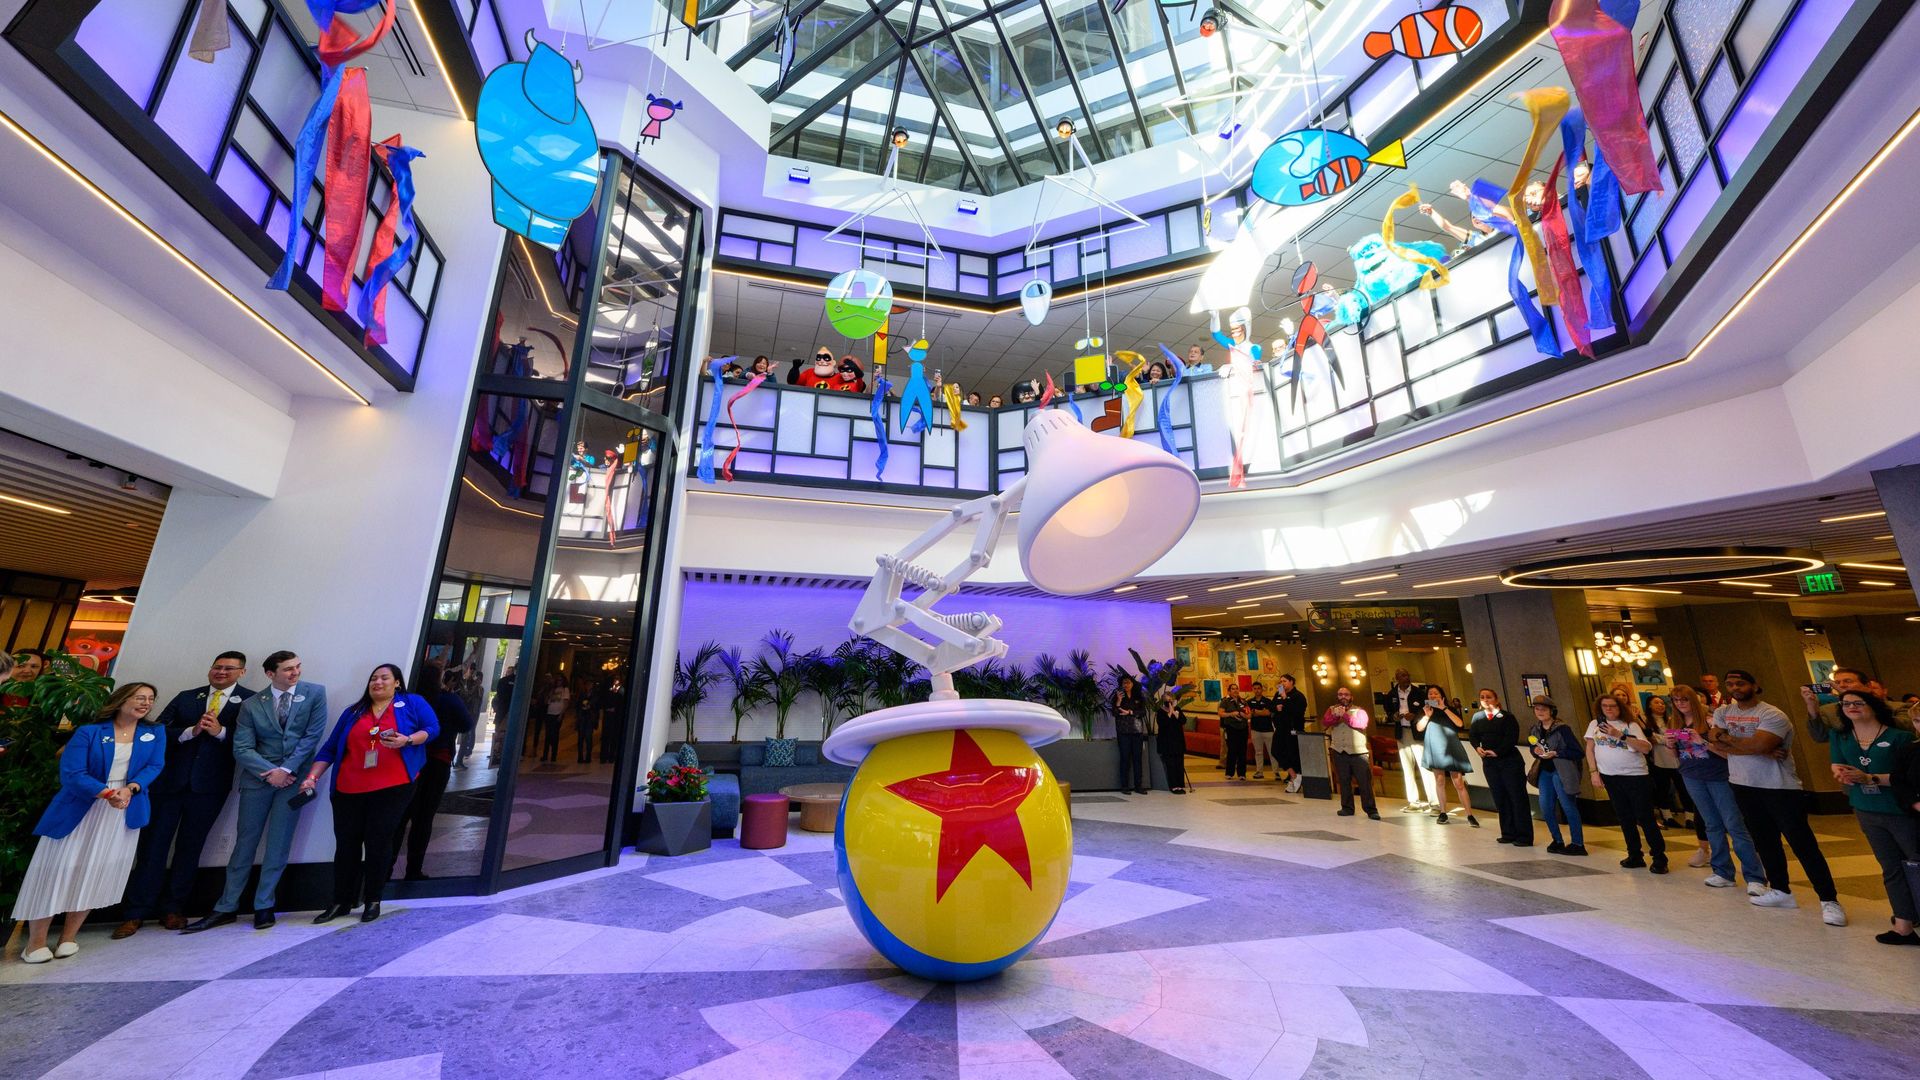 Photo of the interior of the new Pixar Place Hotel, which features a life-sized model of the Pixar lamp logo